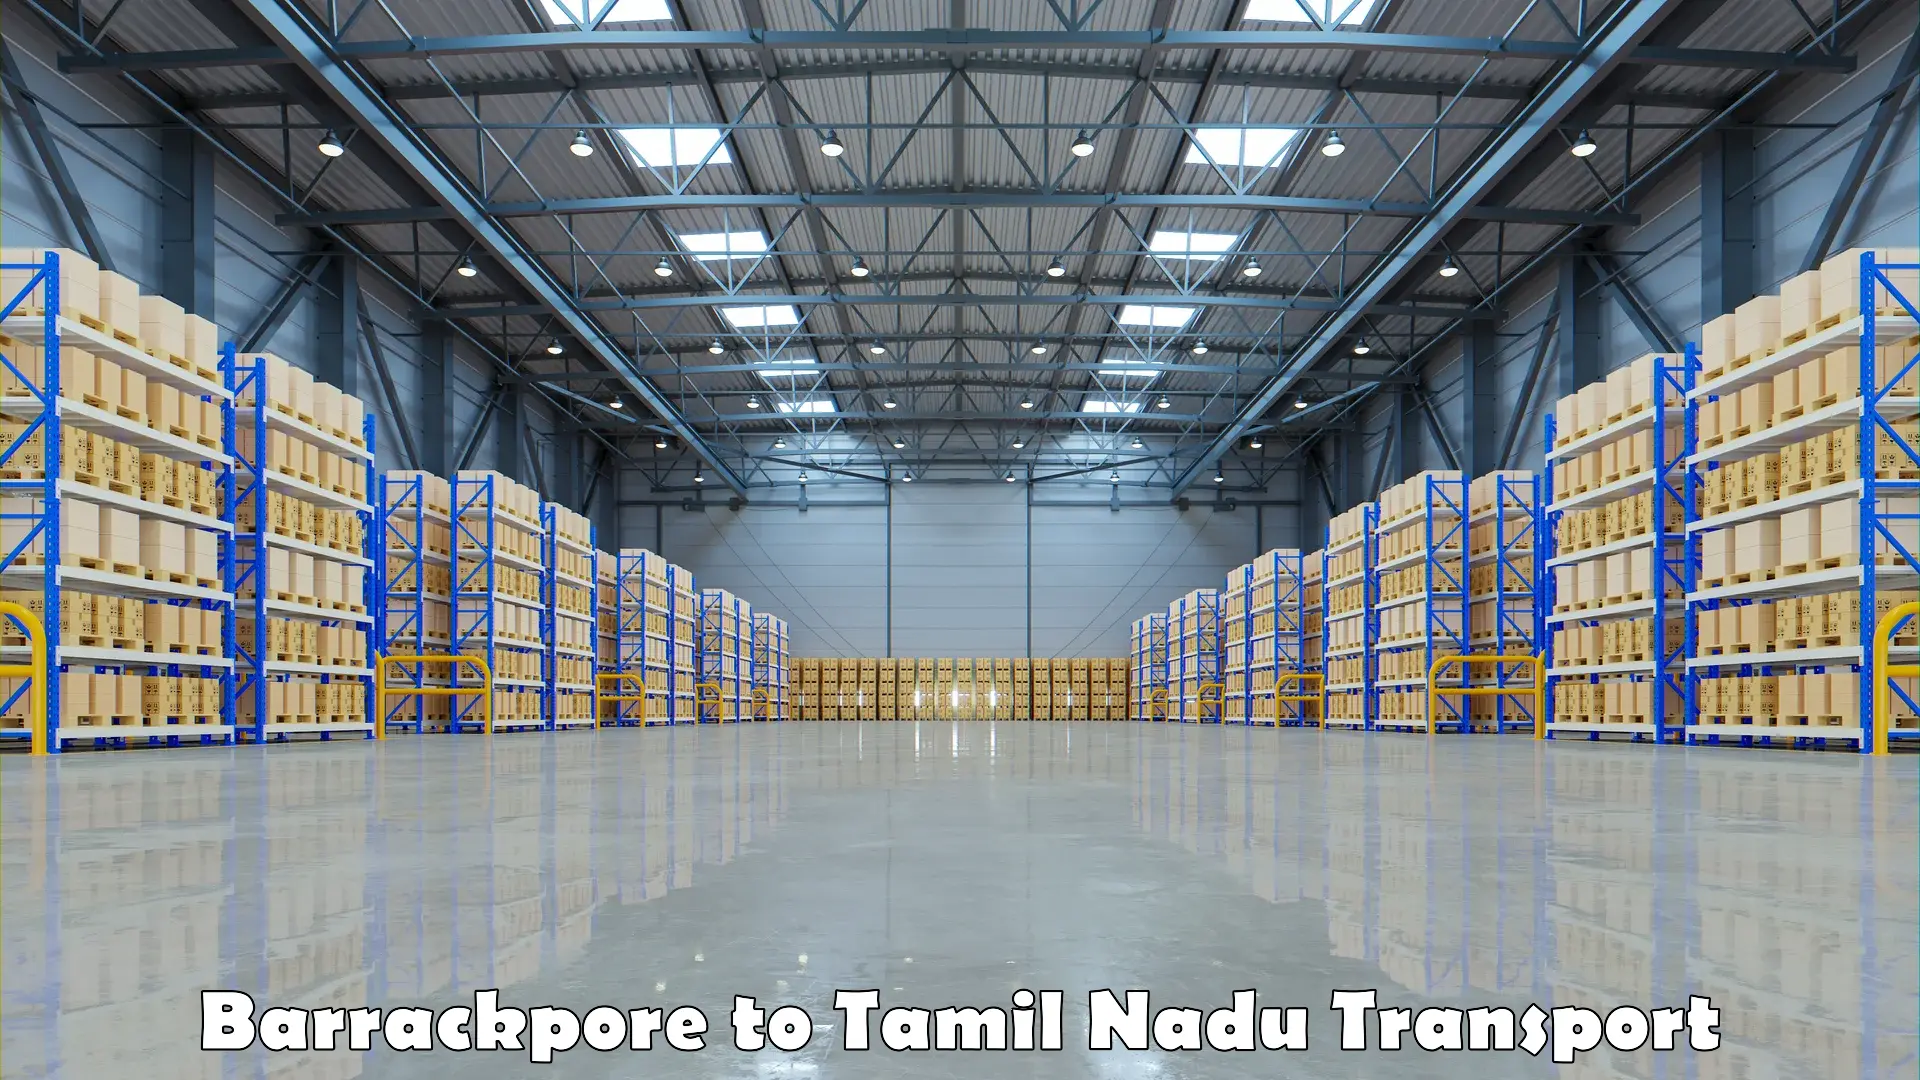 Truck transport companies in India Barrackpore to Tamil Nadu